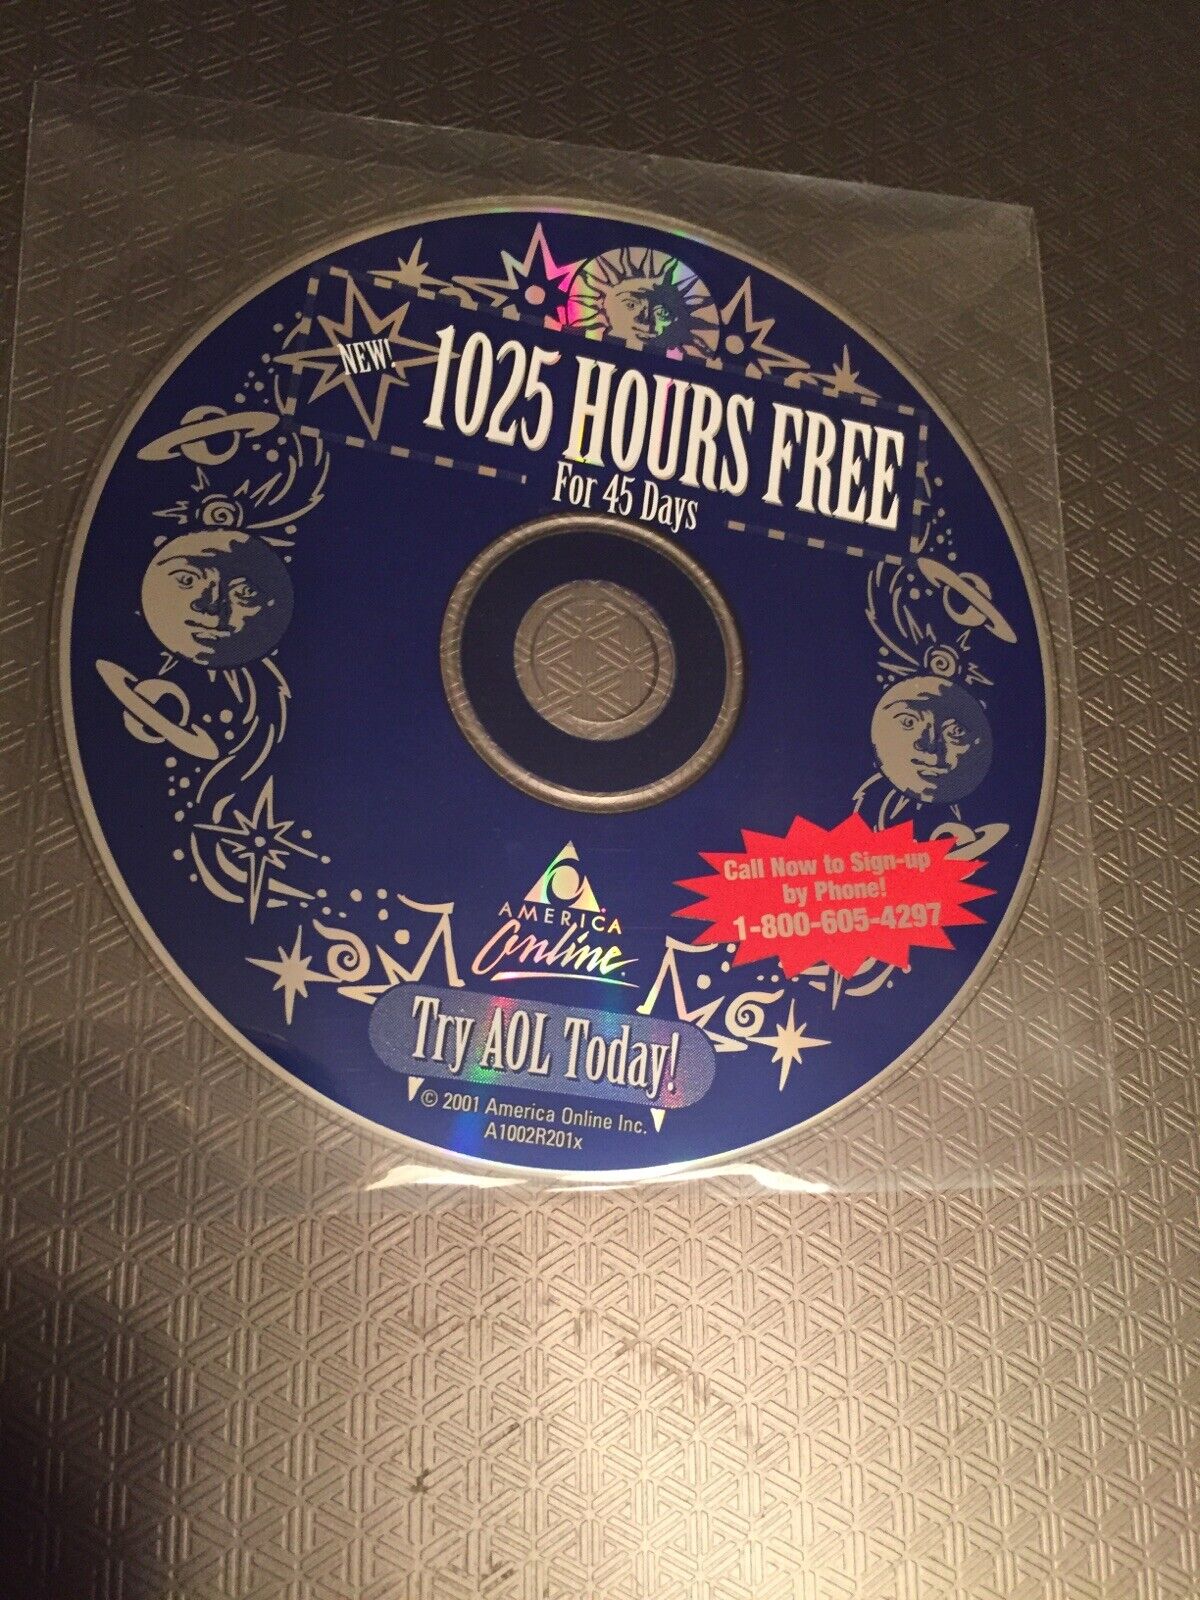 America Online Installation CD, 1025 Hours Free For 45 Days, Try AOL Today 2000